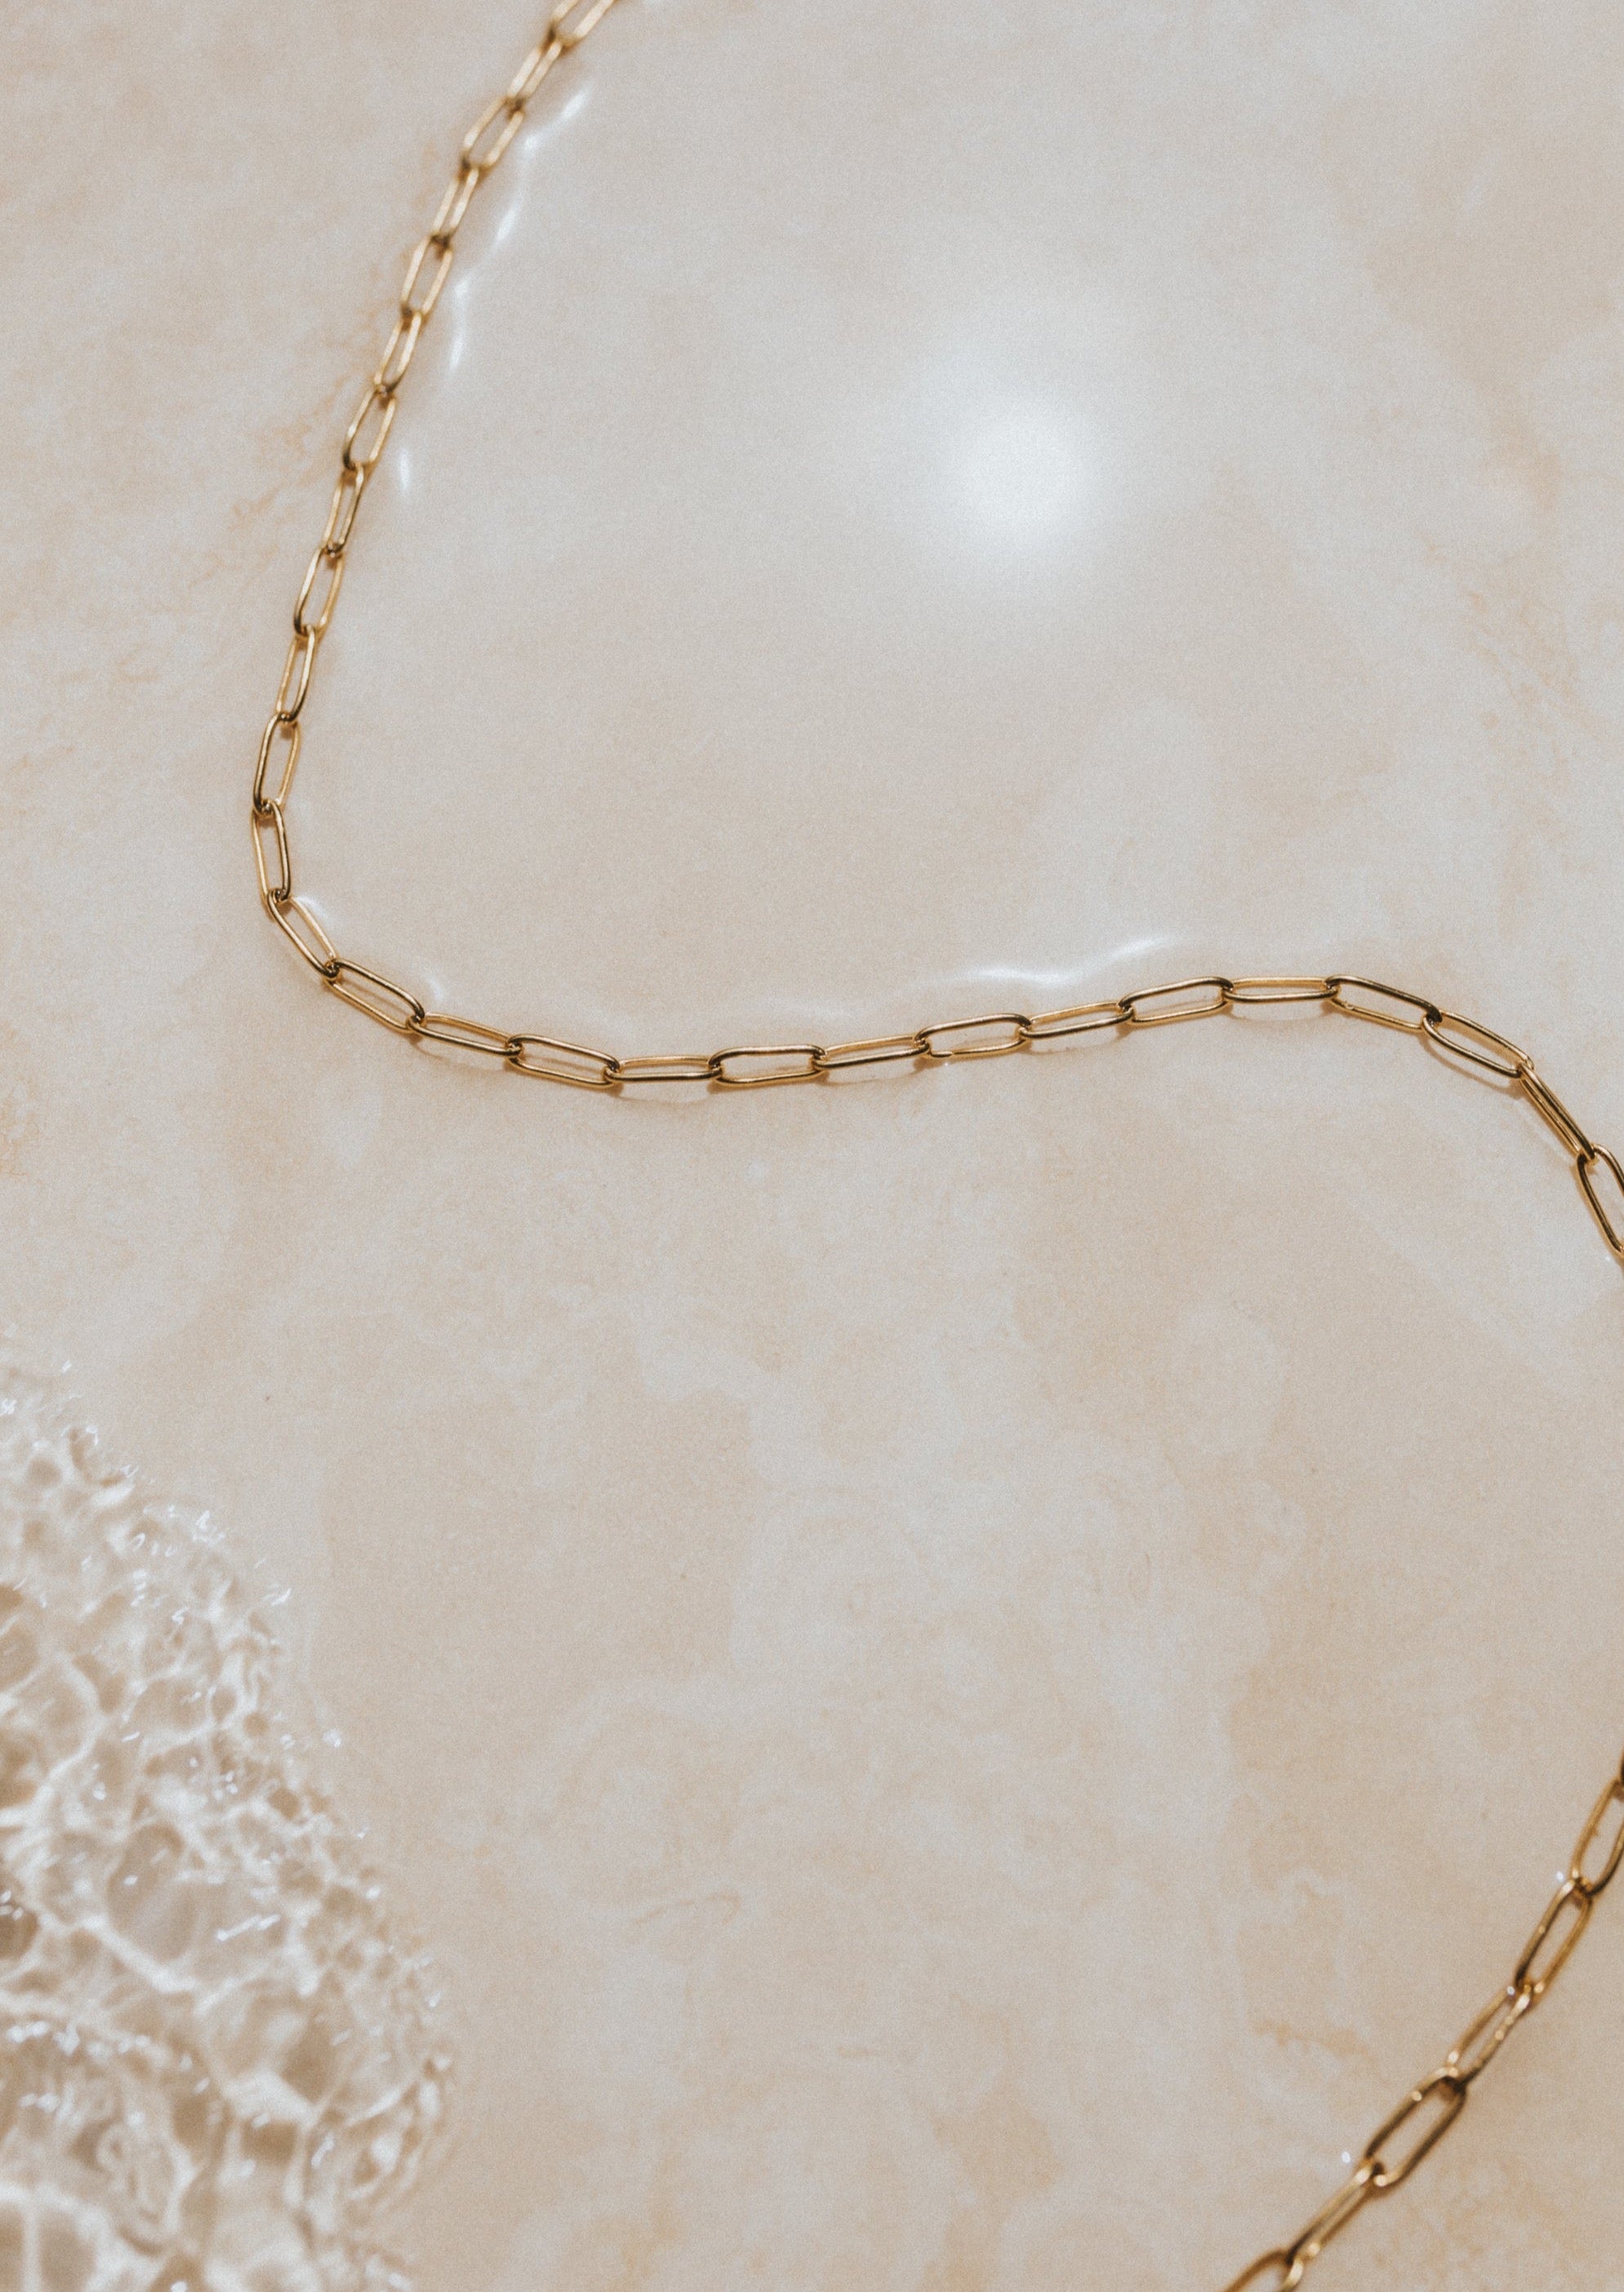 18K gold Link chain waterproof by lore of the sea surf jewelry